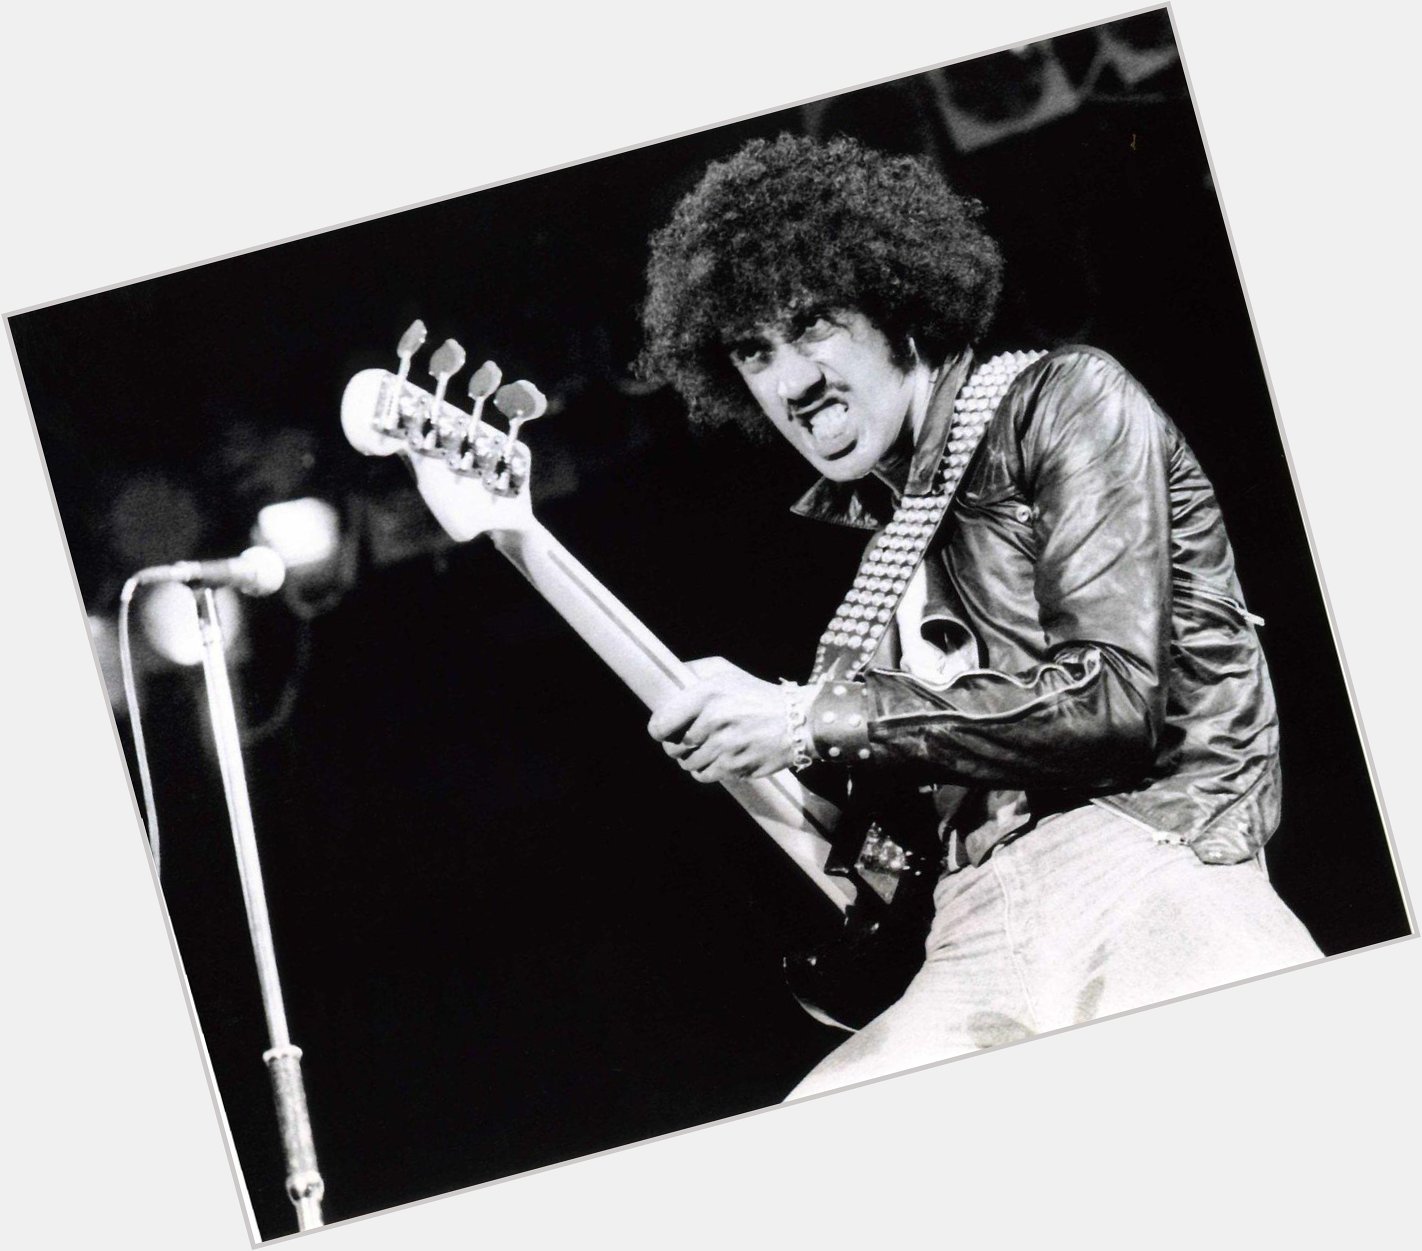 Happy birthday to one of the best! Phil Lynott of Thin Lizzy. You are truly missed, my friend! RIP 